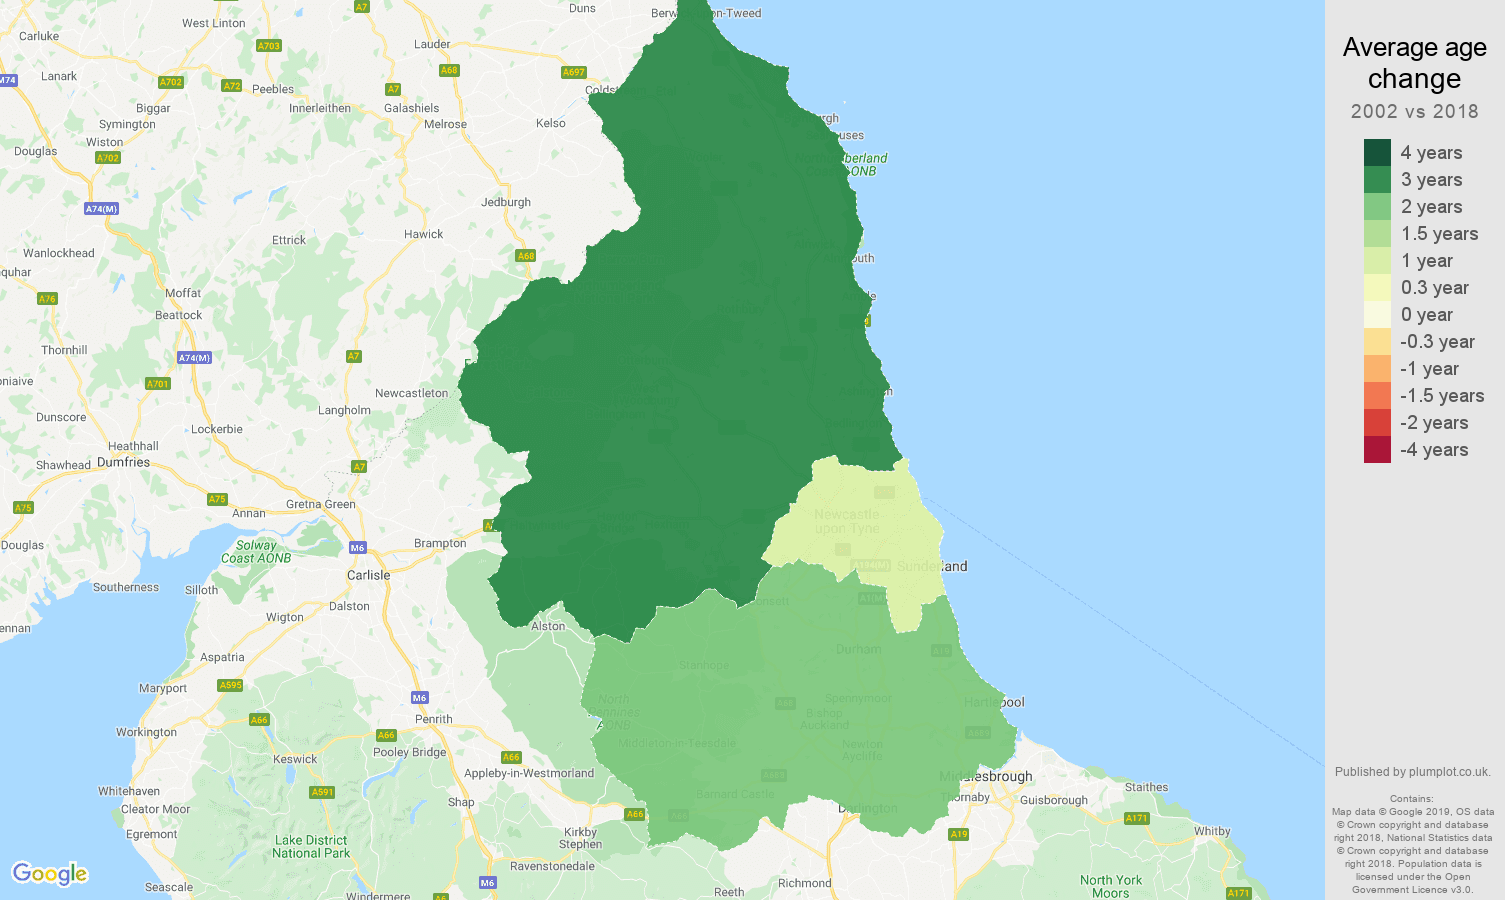 North East average age change map